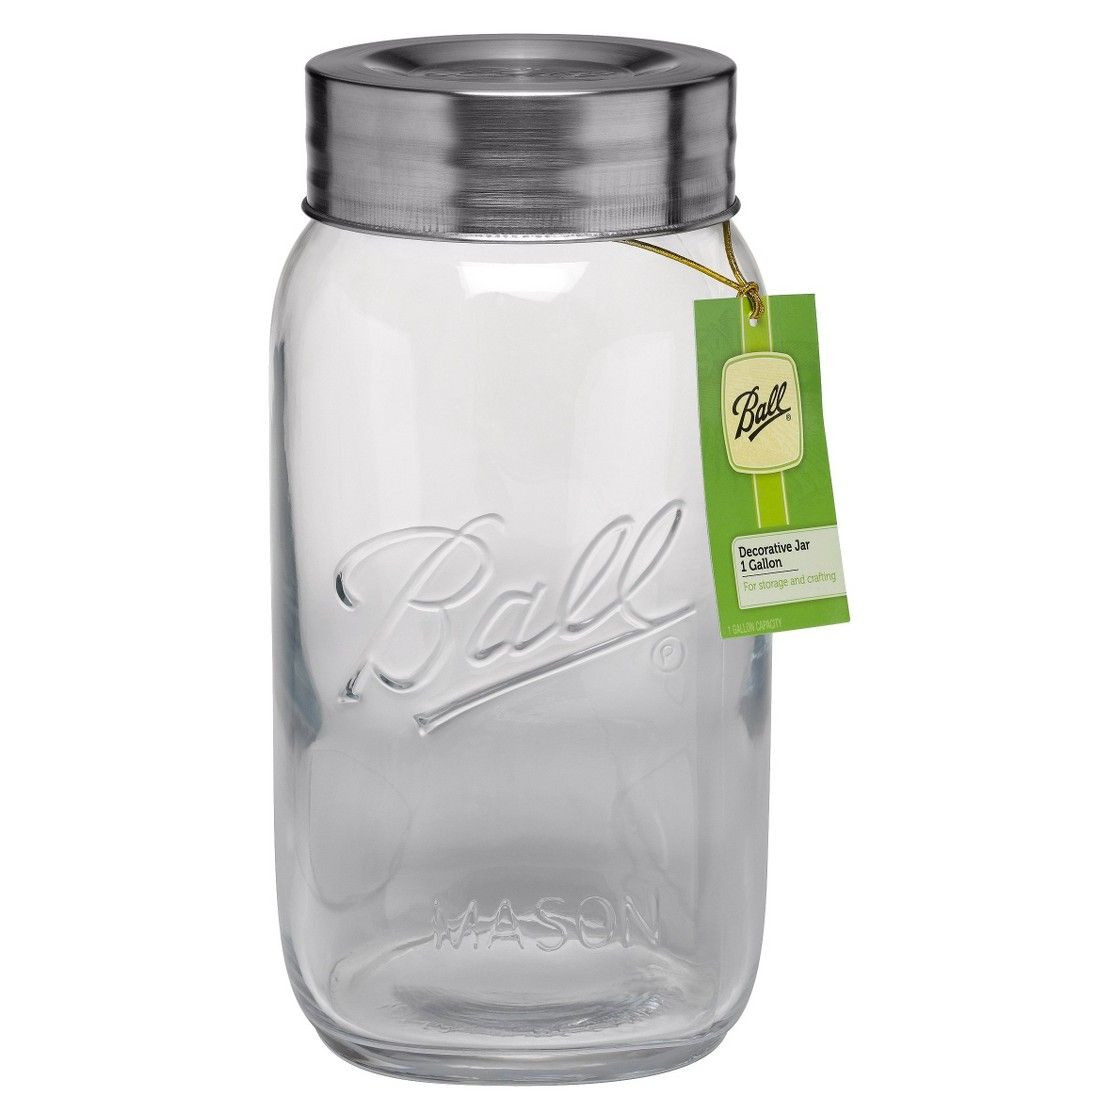 22 Awesome Wide Mouth Glass Vases 2024 free download wide mouth glass vases of balla wide mouth gallon 128 oz collectors mason jar with lid pertaining to balla wide mouth gallon 128 oz collectors mason jar with lid